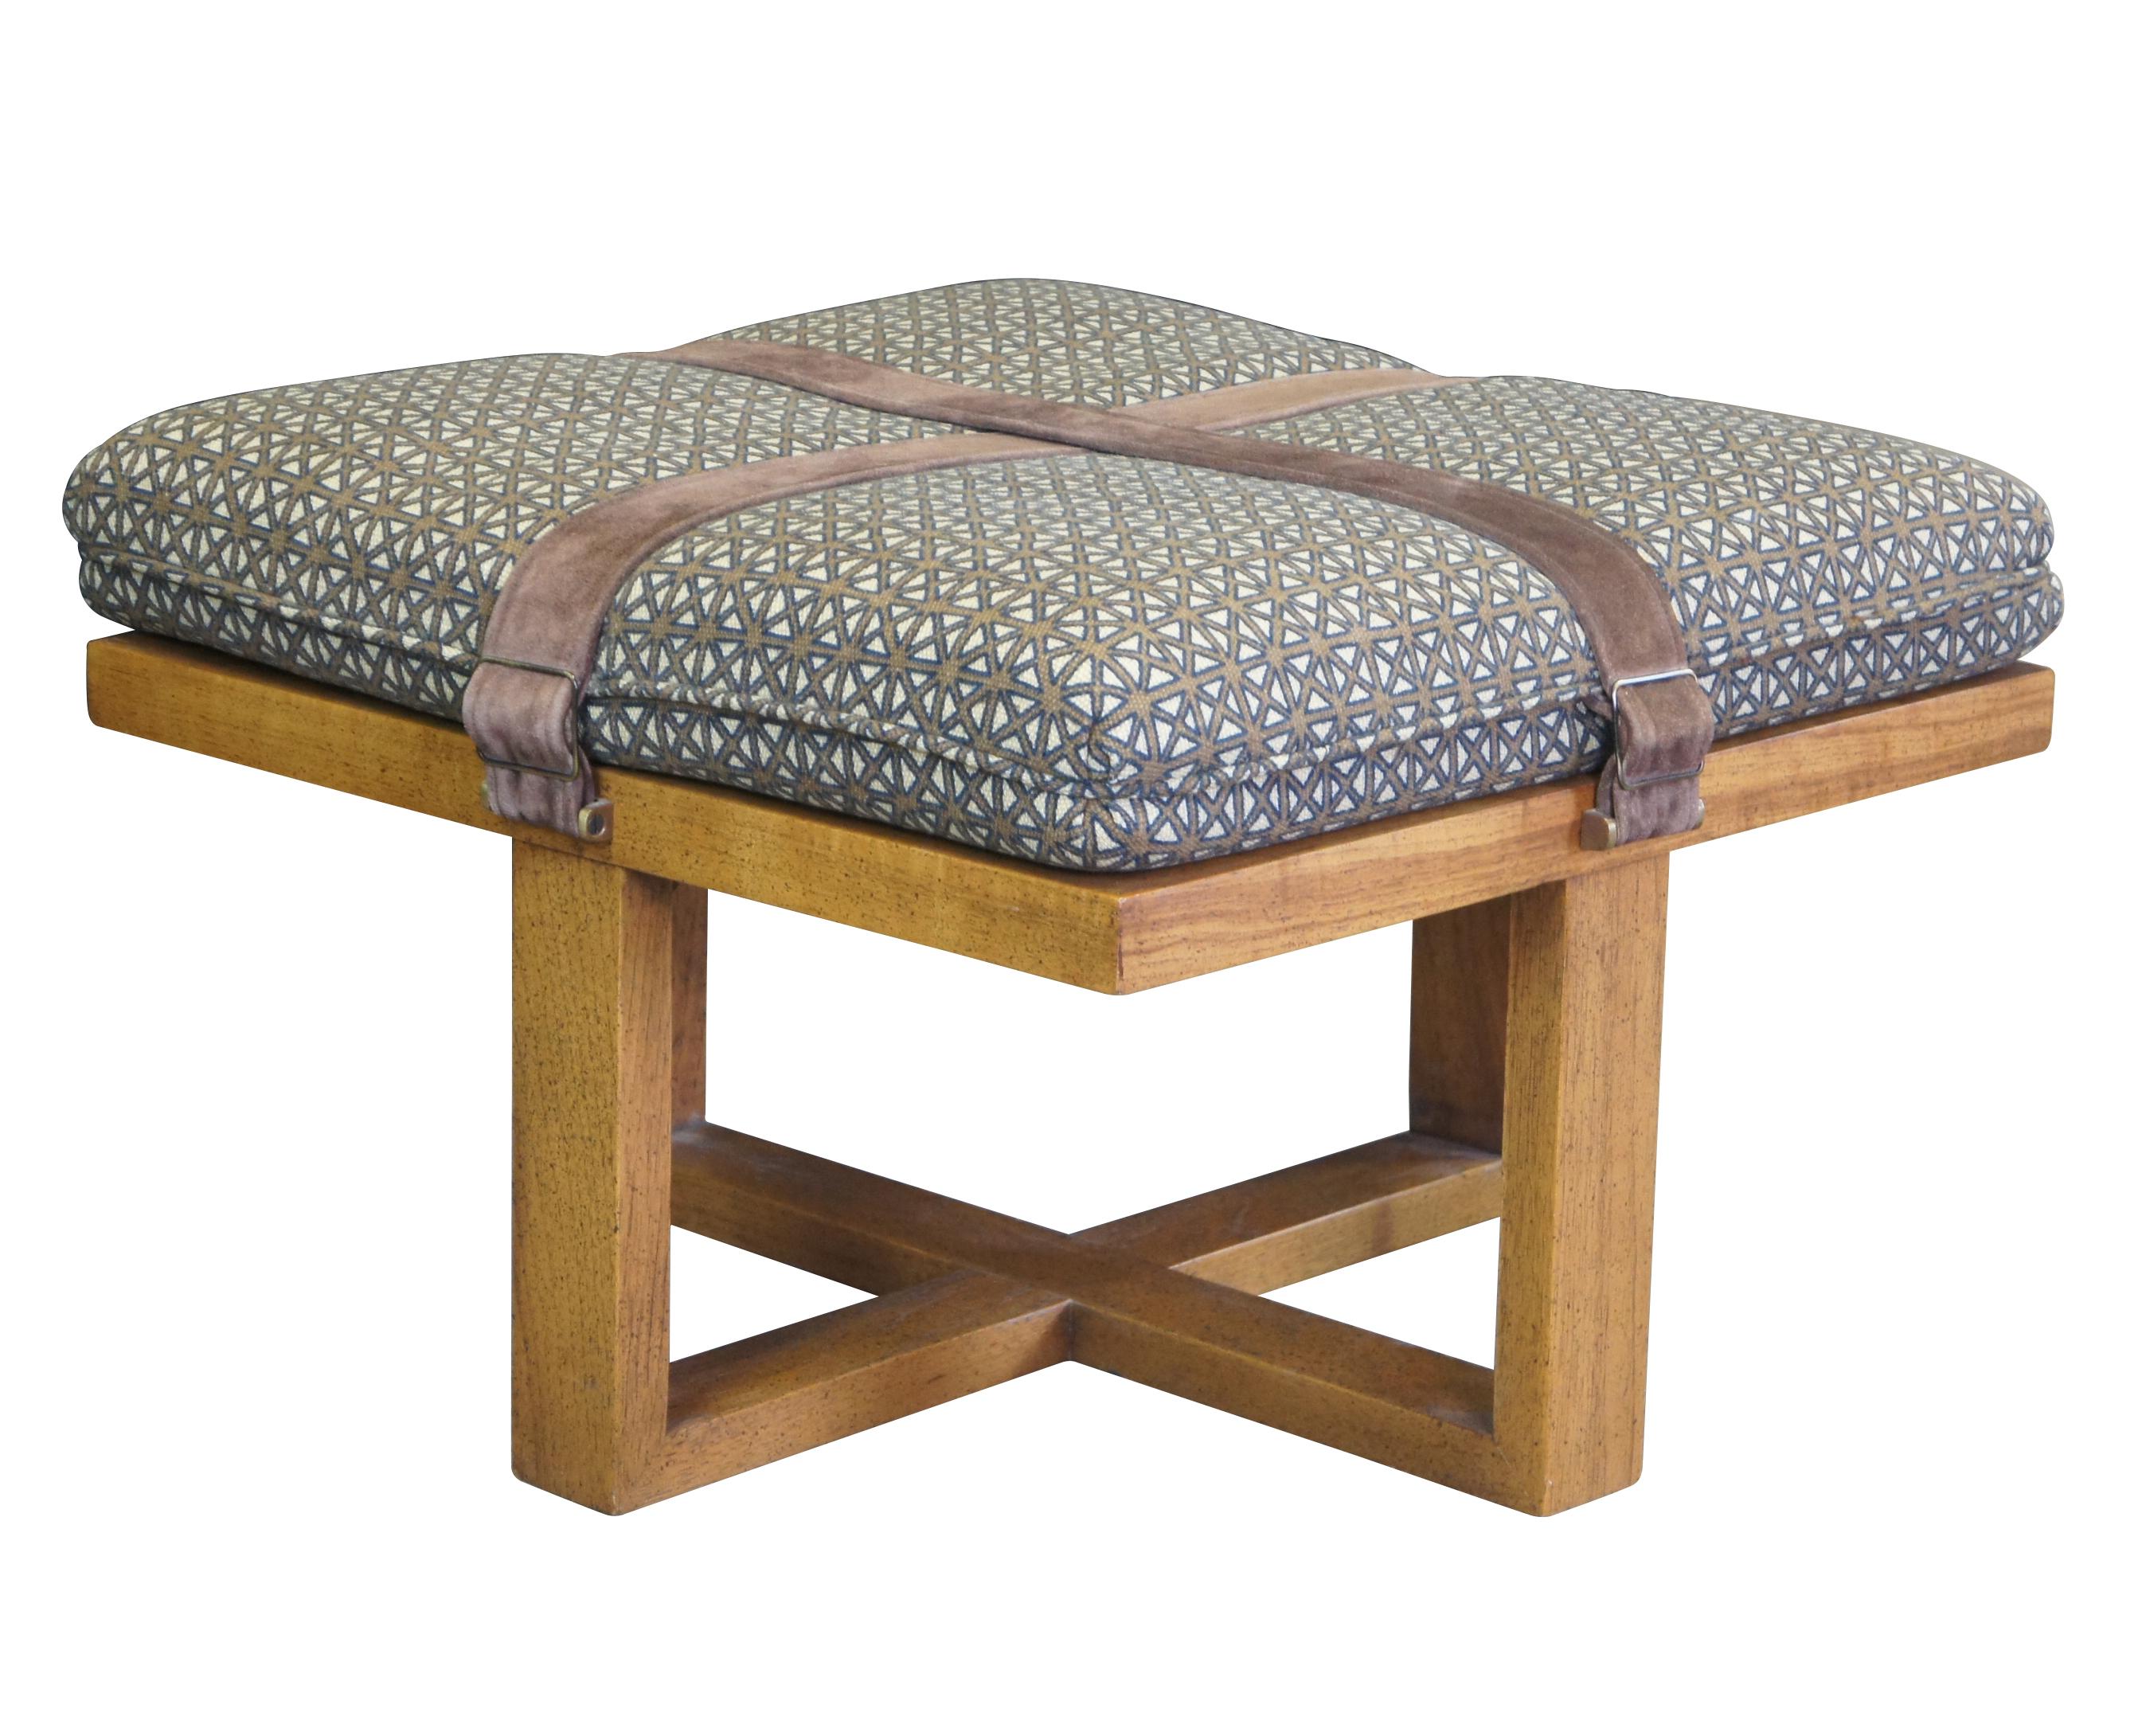 Late 20th century square ottoman with open wood base and a cushioned top finished in blue and brown lattice pattern upholstery and crossed with suede leather straps.